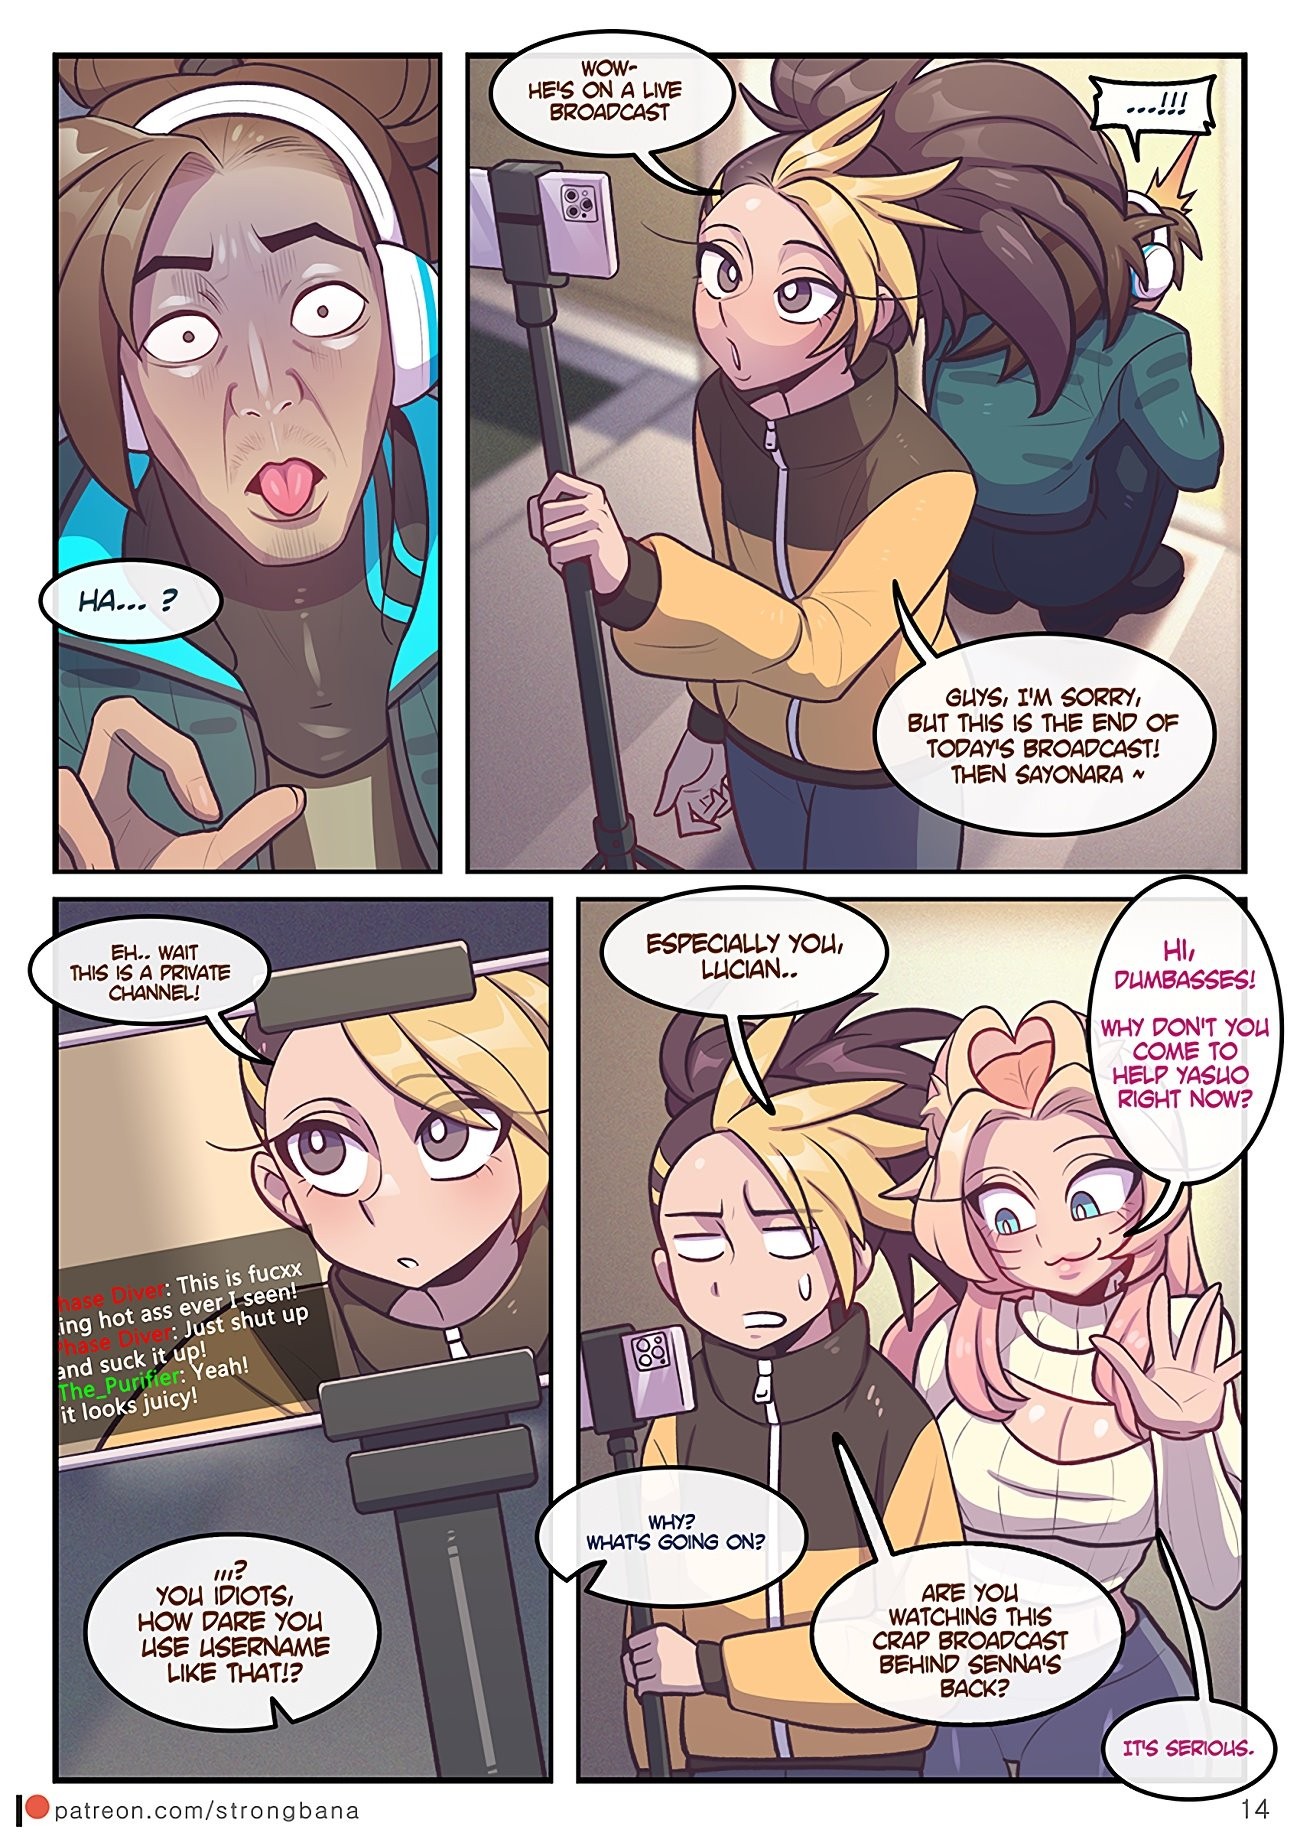 Strong Bana - Live Streaming (League of Legends) porn comic picture 16